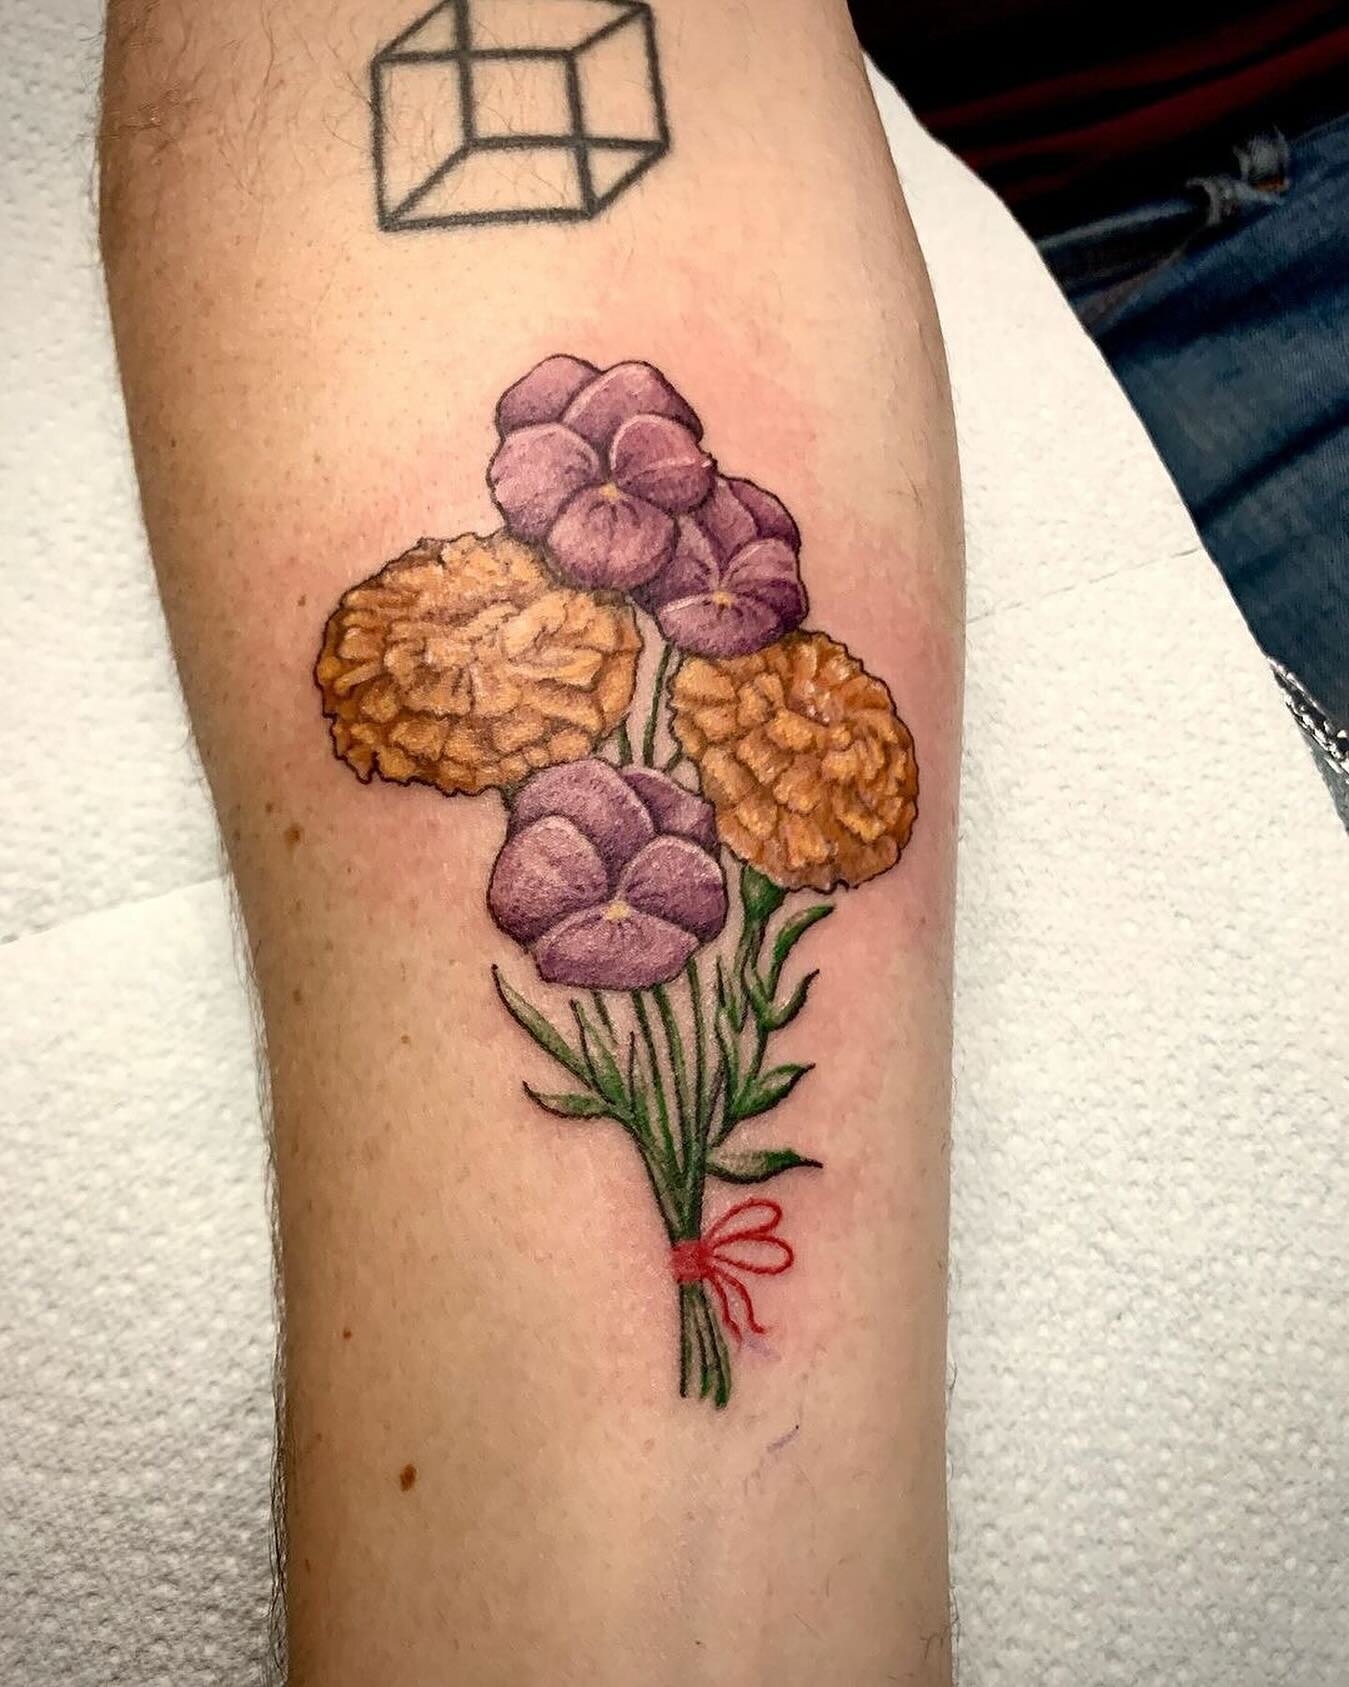 @charlieleightattoostuff Adorable lil bundle of flowers to represent their daughters 🤩 I love how sweet pieces like this are 🥰  #flowertattoo #floraltattoo #marigolds #marigoldtattoo #violet #violettattoo #colourtattoo #familytattoo #colourrealism 